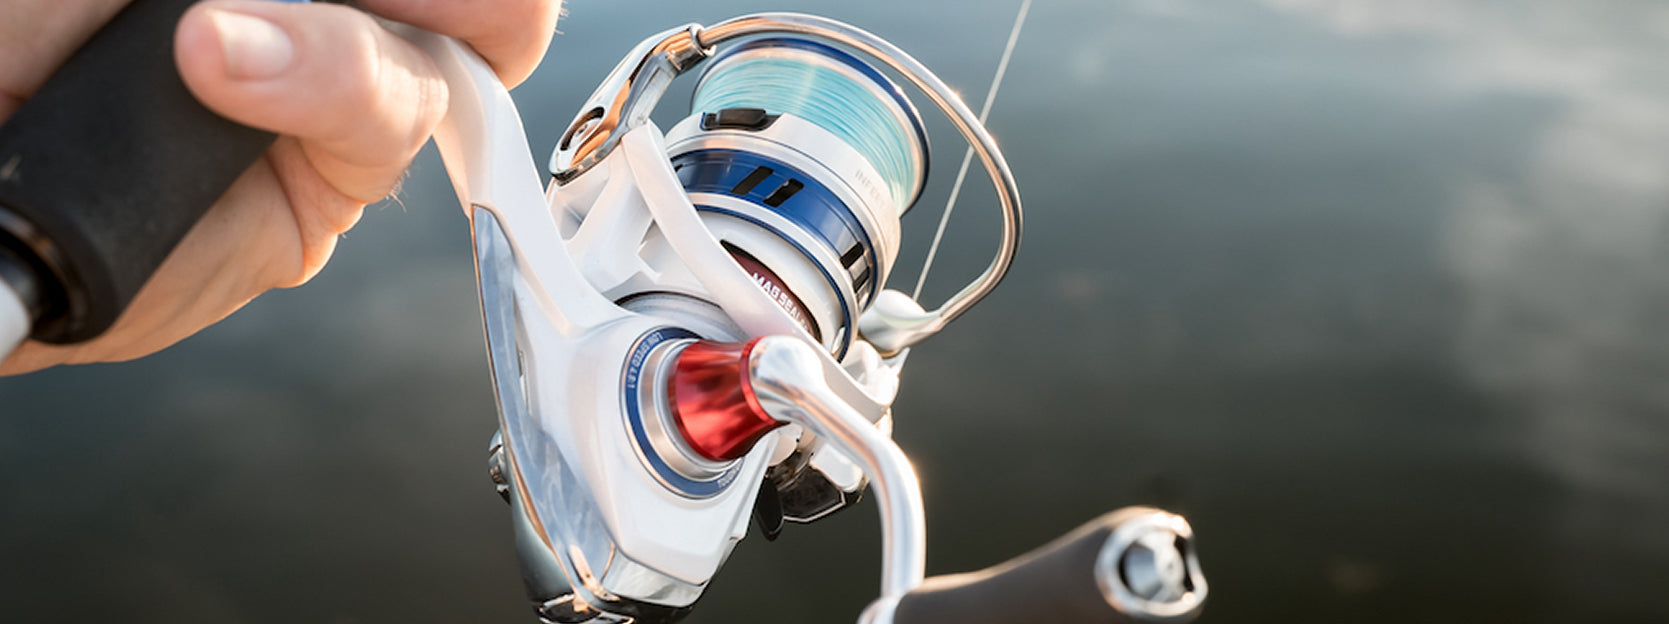 Get Fishing Reel Accessories, Fishing Tools and Accessories, Braid